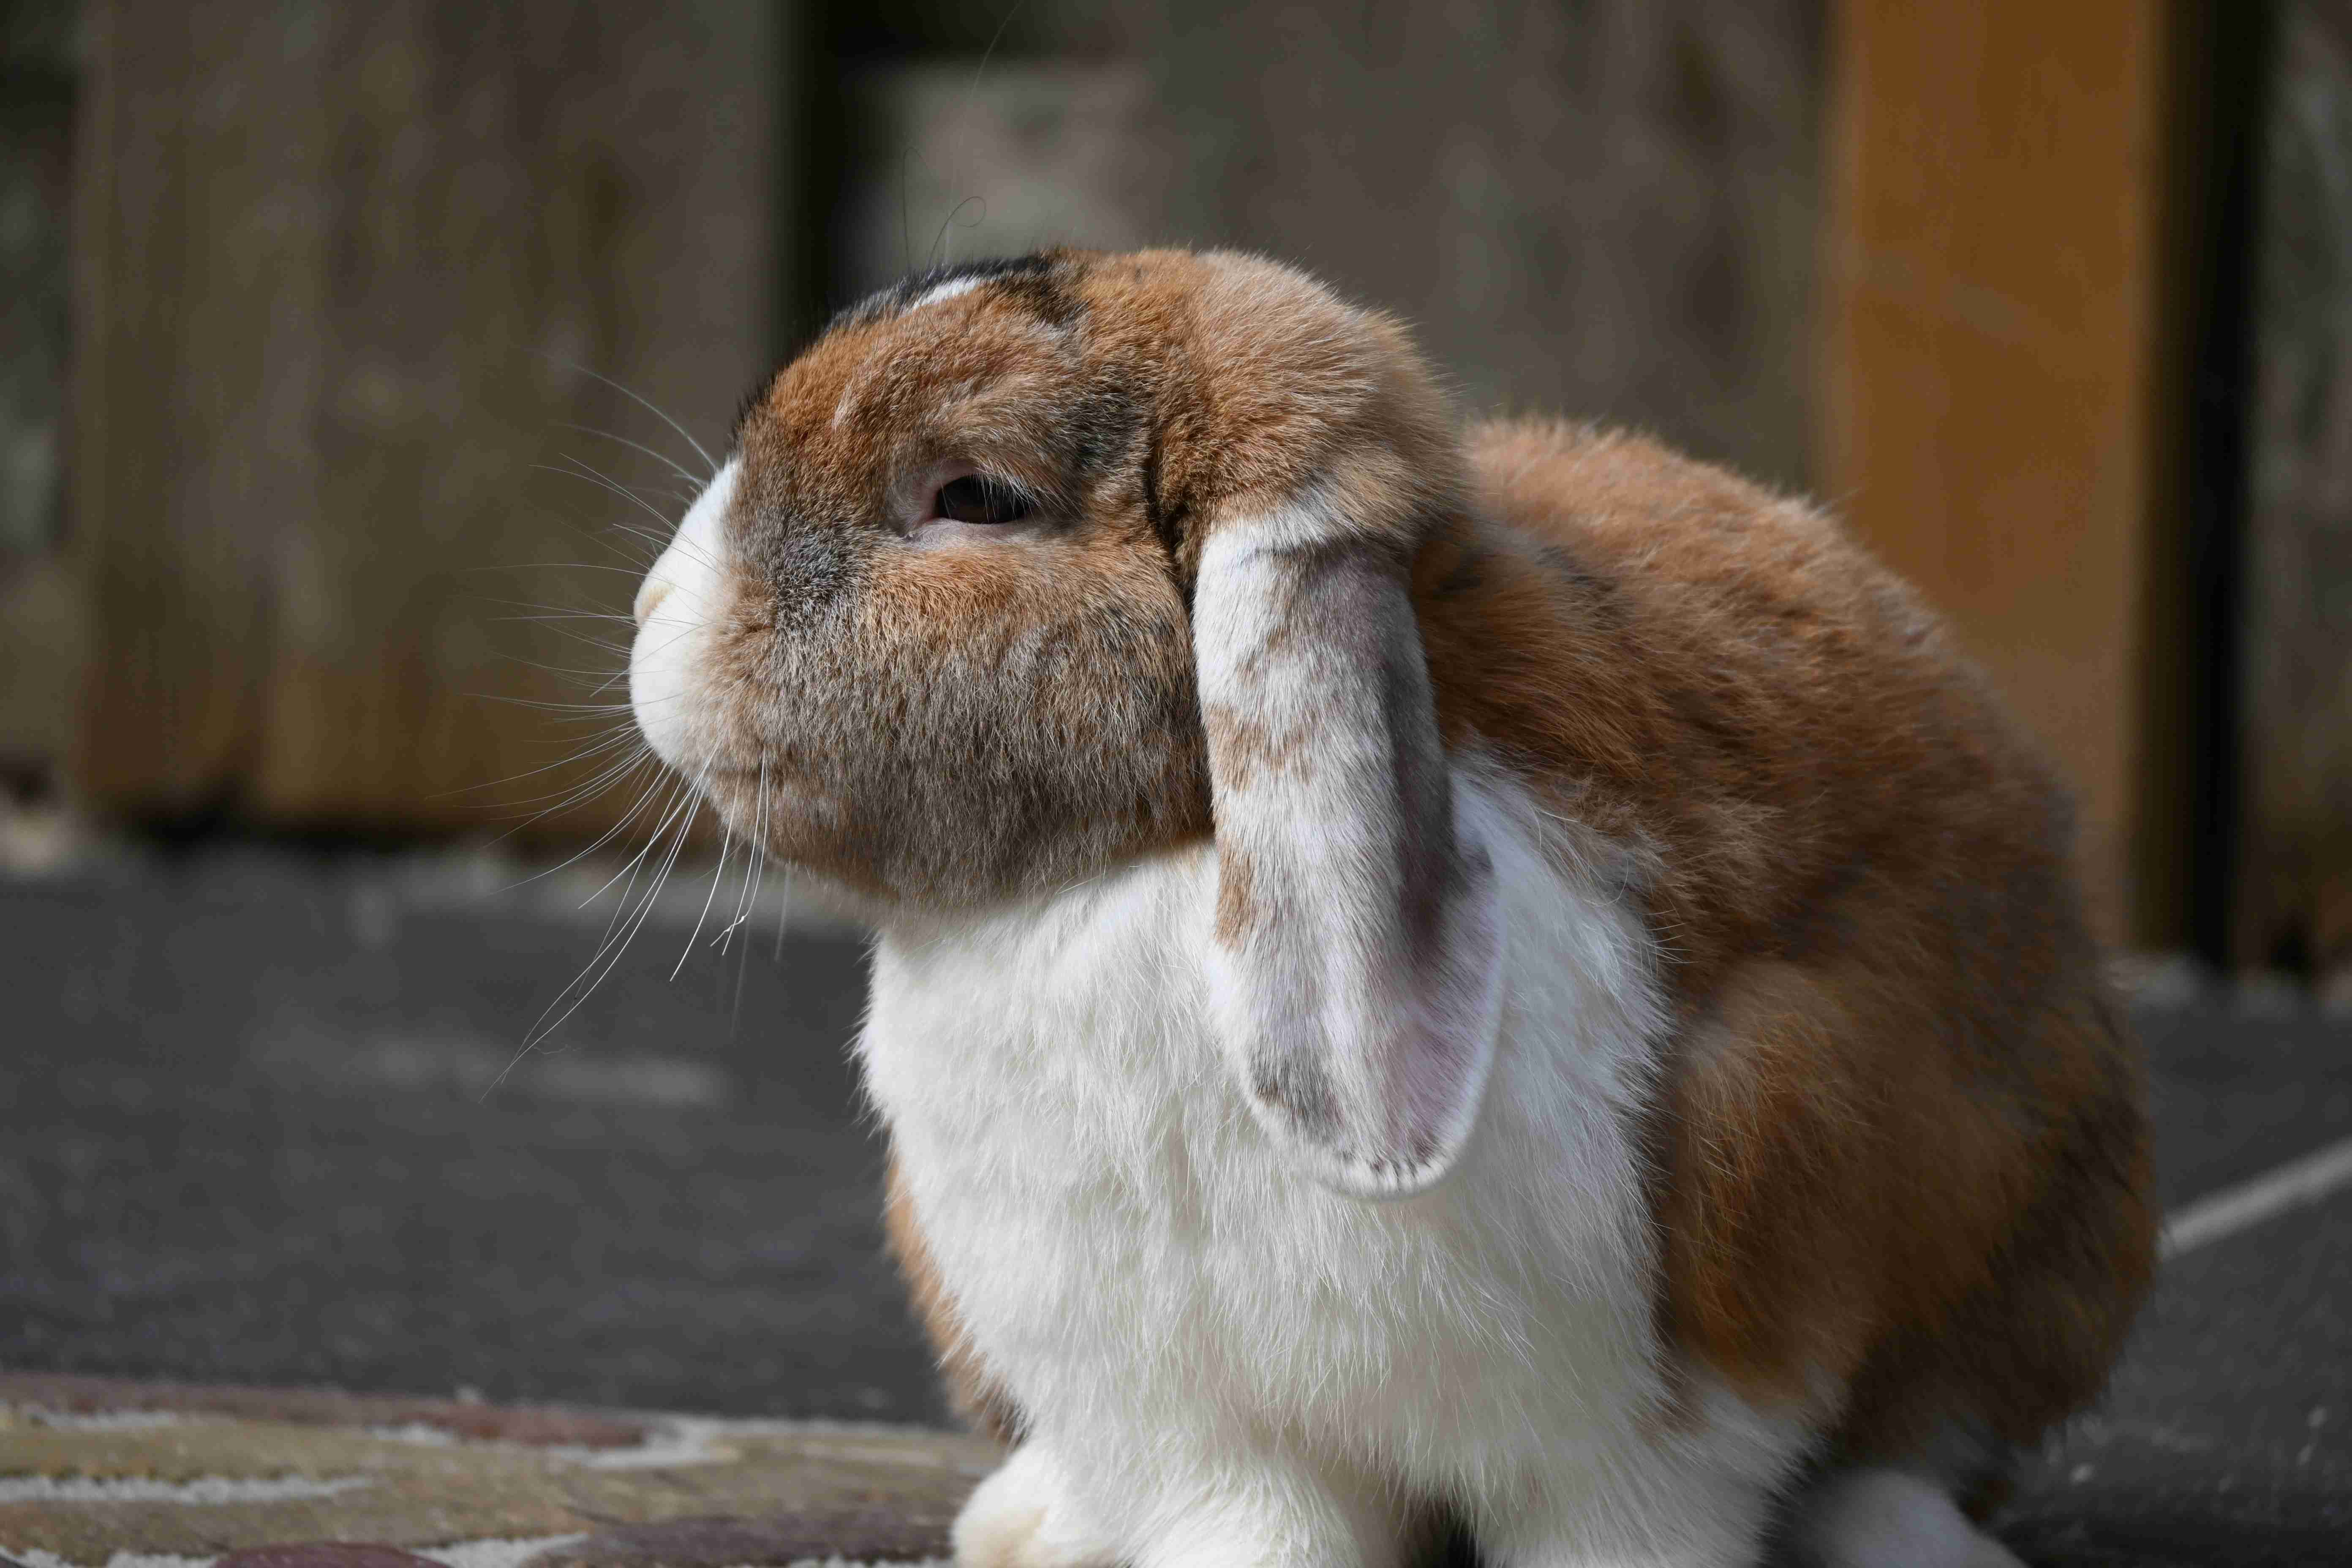 5 Effective Ways to Stop Your Rabbit from Chewing on Electrical Cords